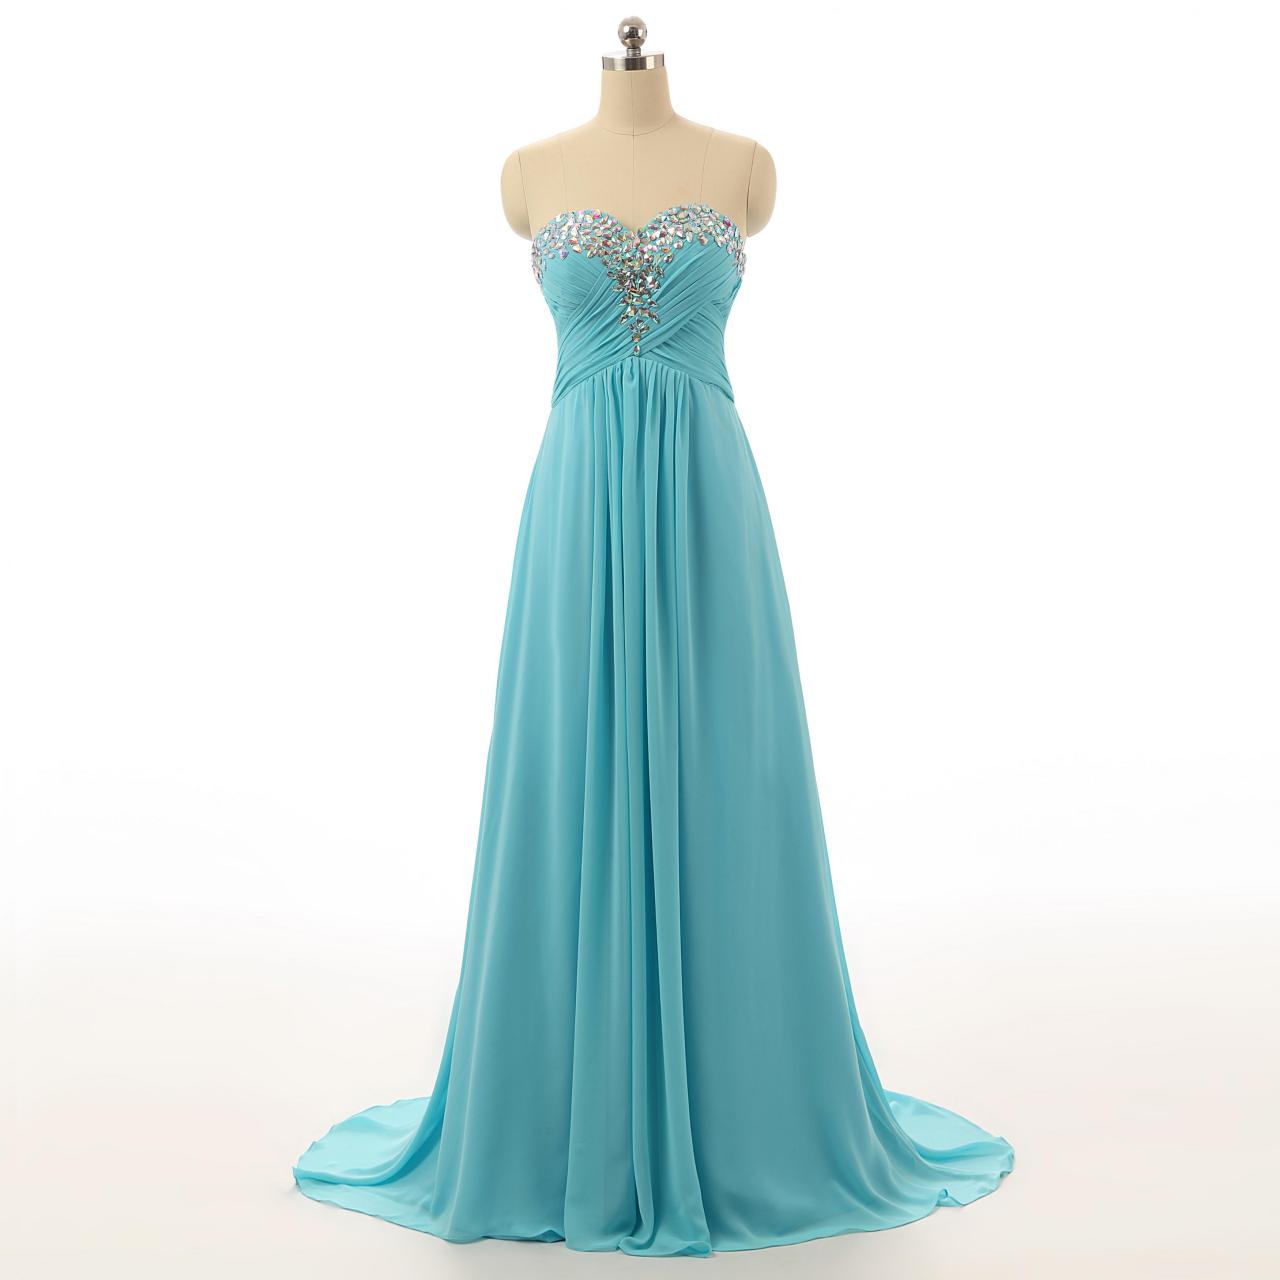 Strapless Sweetheart A-line Long Prom Dress With Iridescent Beads